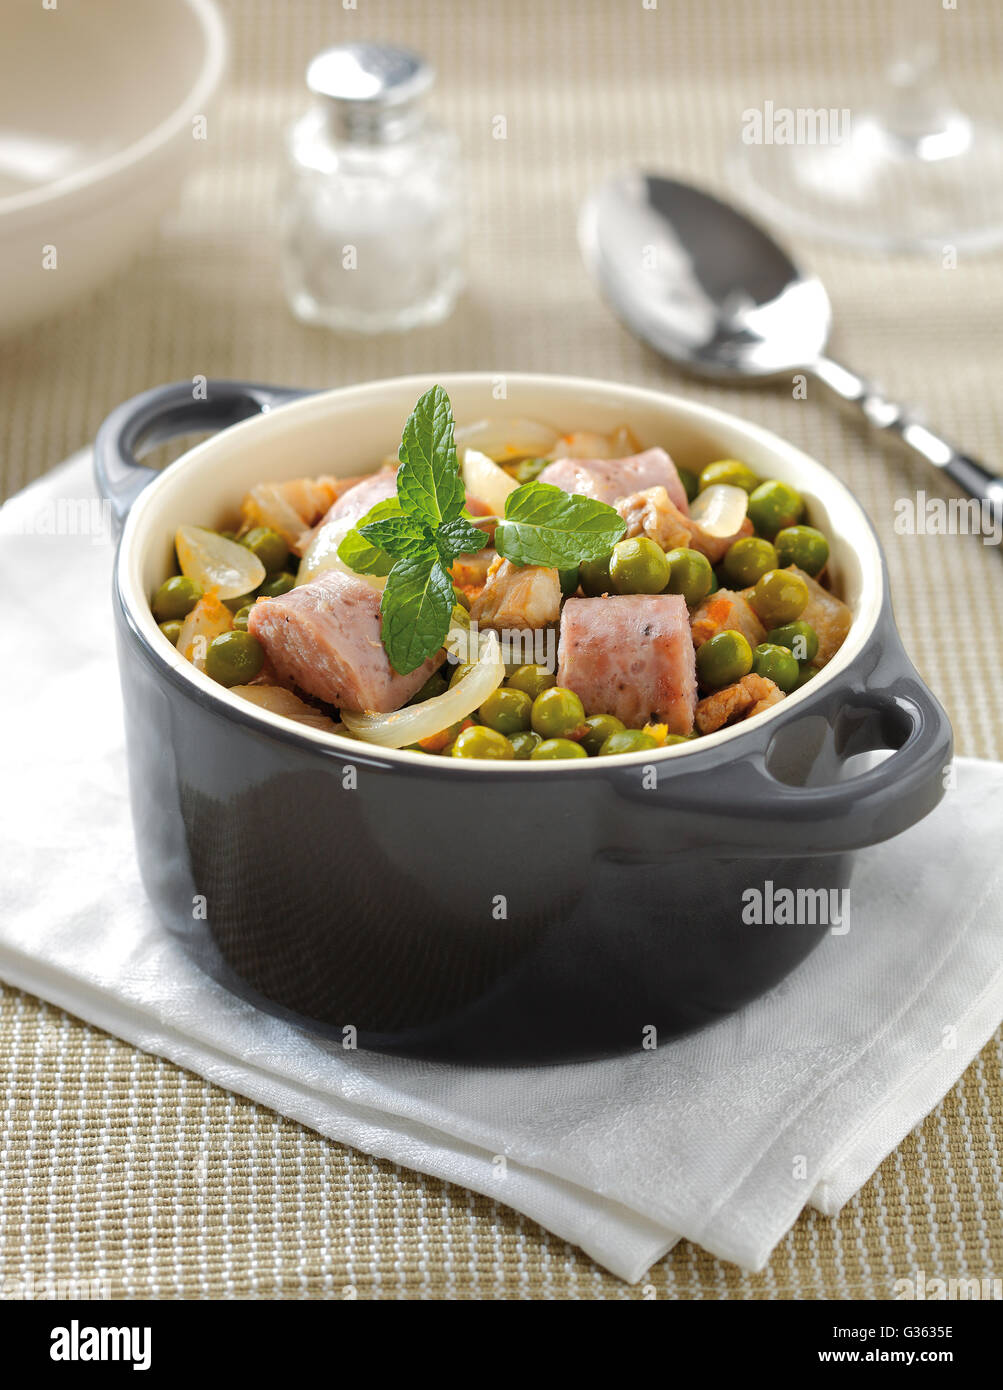 Green pea stew in a small ceramic cooking pot with onions, carrot and sausage. Stock Photo